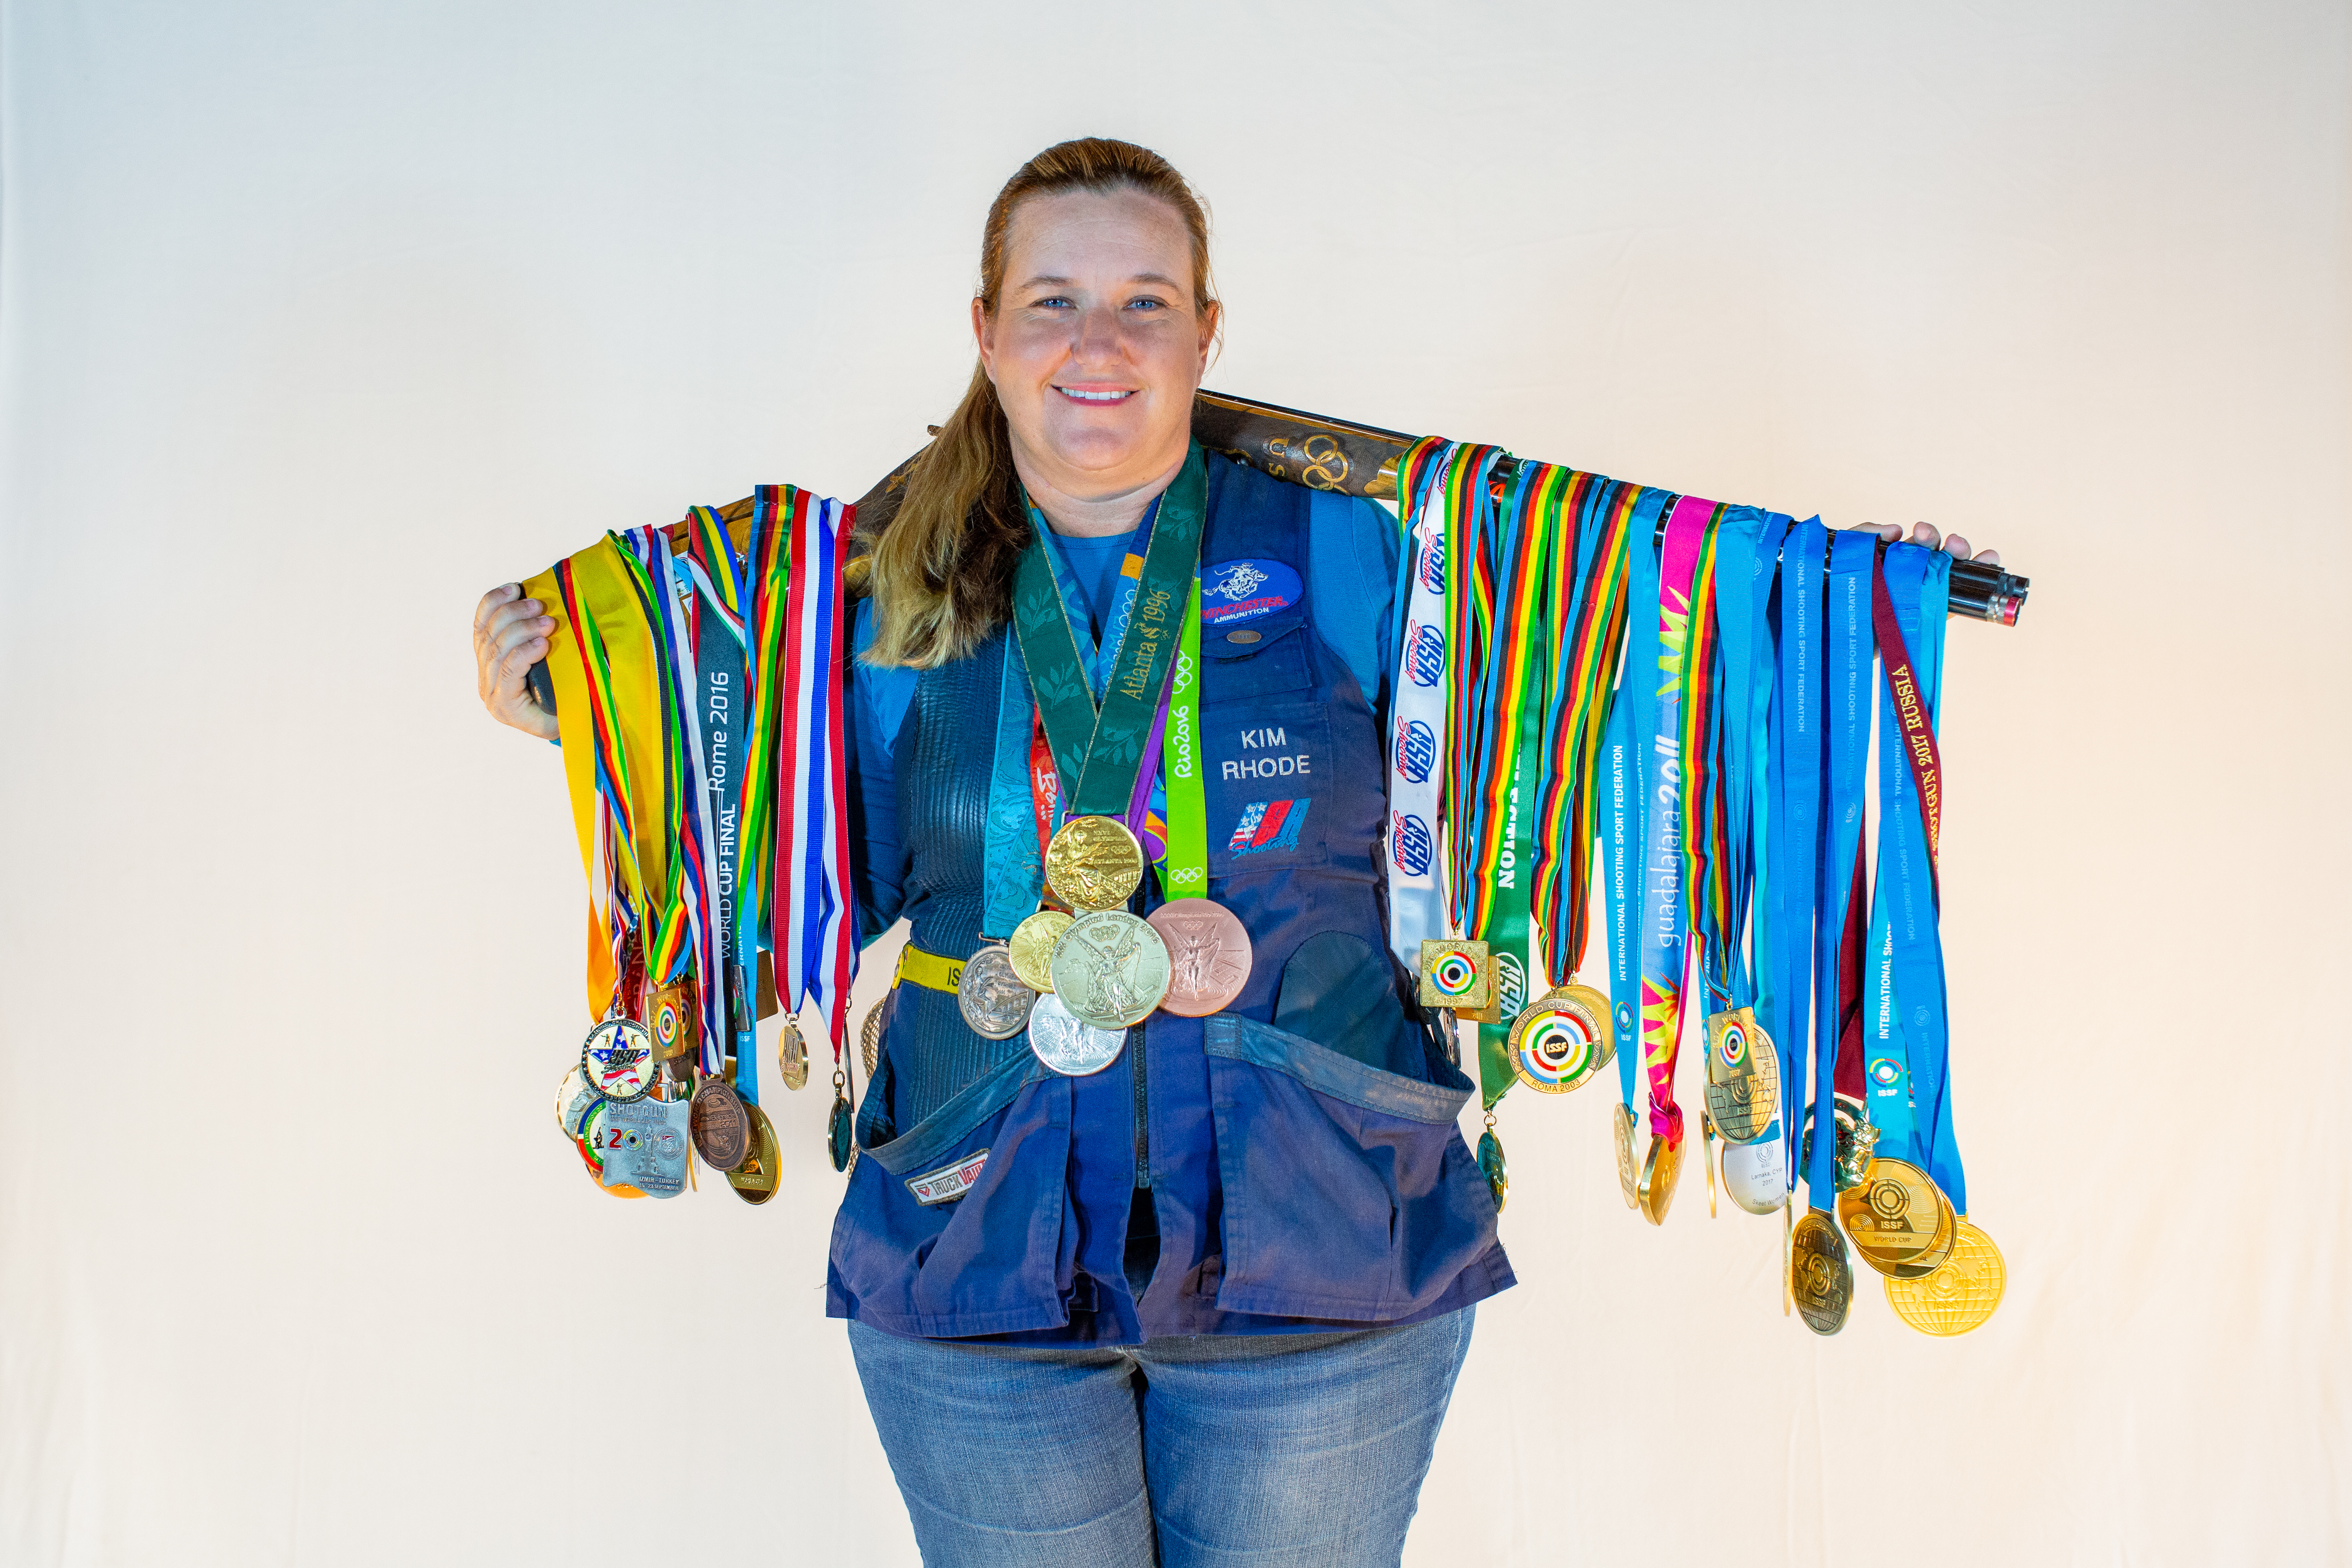 Kim Rhode Continues Legendary Shooting Sports Career with Winchester Ammunition